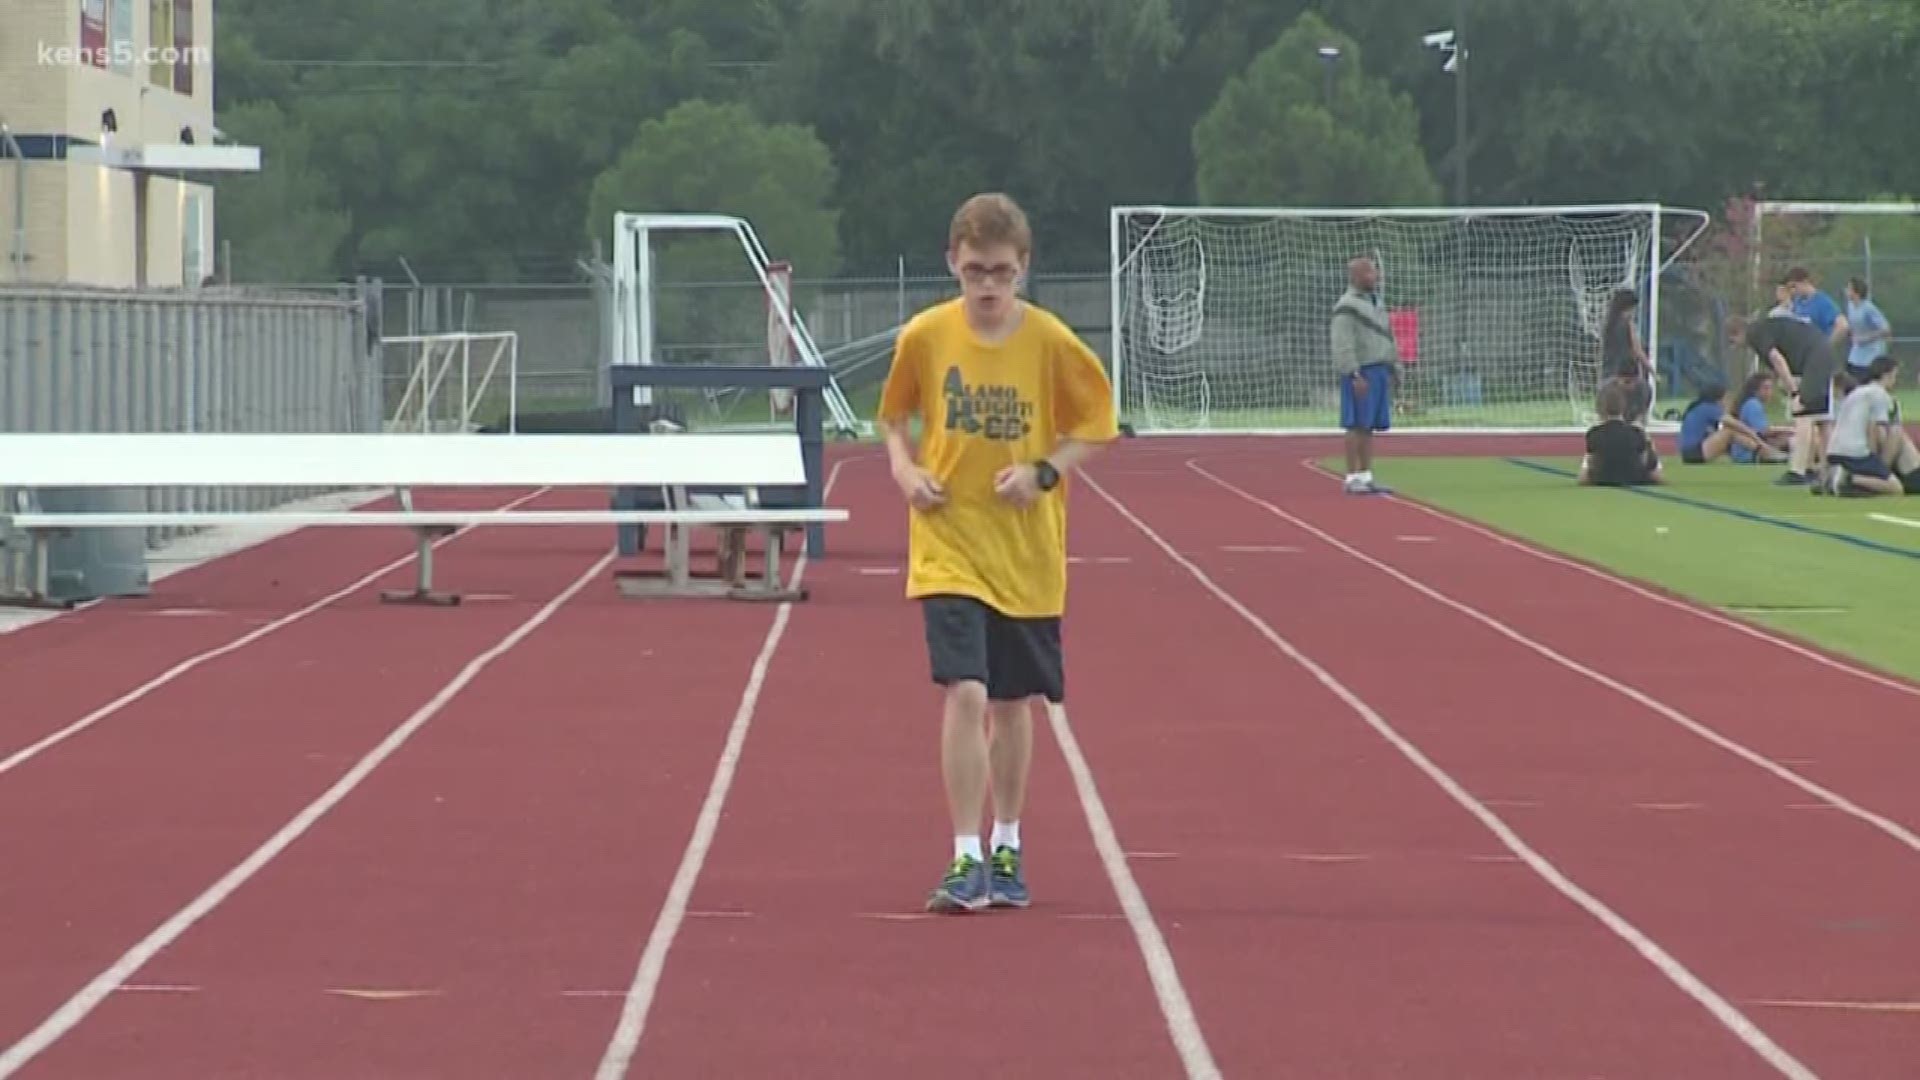 He's the runner who always finishes last, but this Alamo Heights cross country team member impresses his teammates every time he hits the track.